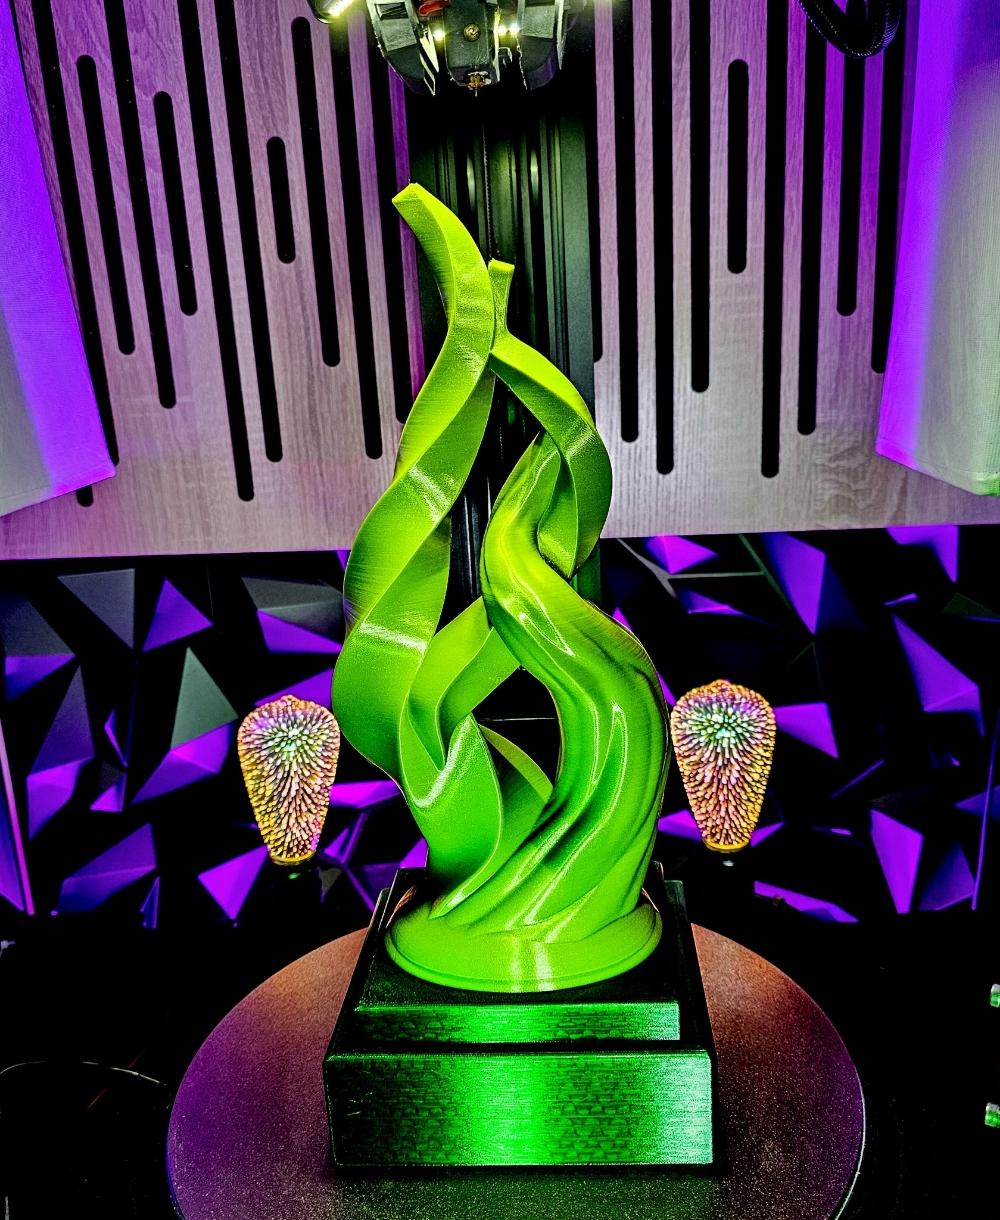 3DPI Integration Award #3DPIAwards - Printed Solid, Jessie Geen Ice & Slime Green Glitter. What a beautiful design 💚 - 3d model